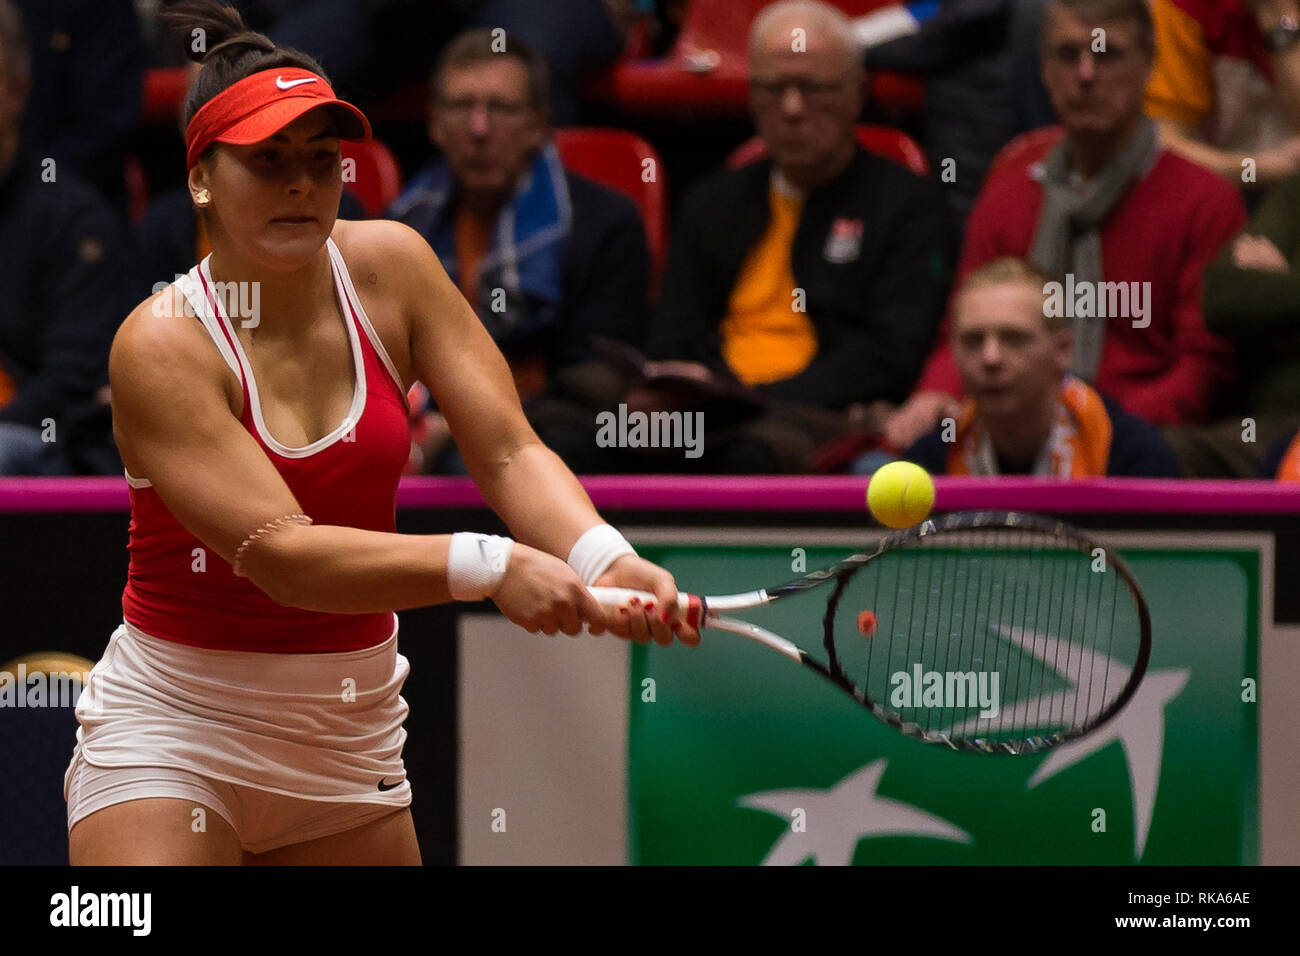 9 february 2019 Den Bosch, Netherlands Tennis, FED Cup Netherlands v Canada   Bianca Andreescu (Canada) Credit: Orange Pictures vof/Alamy Live News Stock Photo